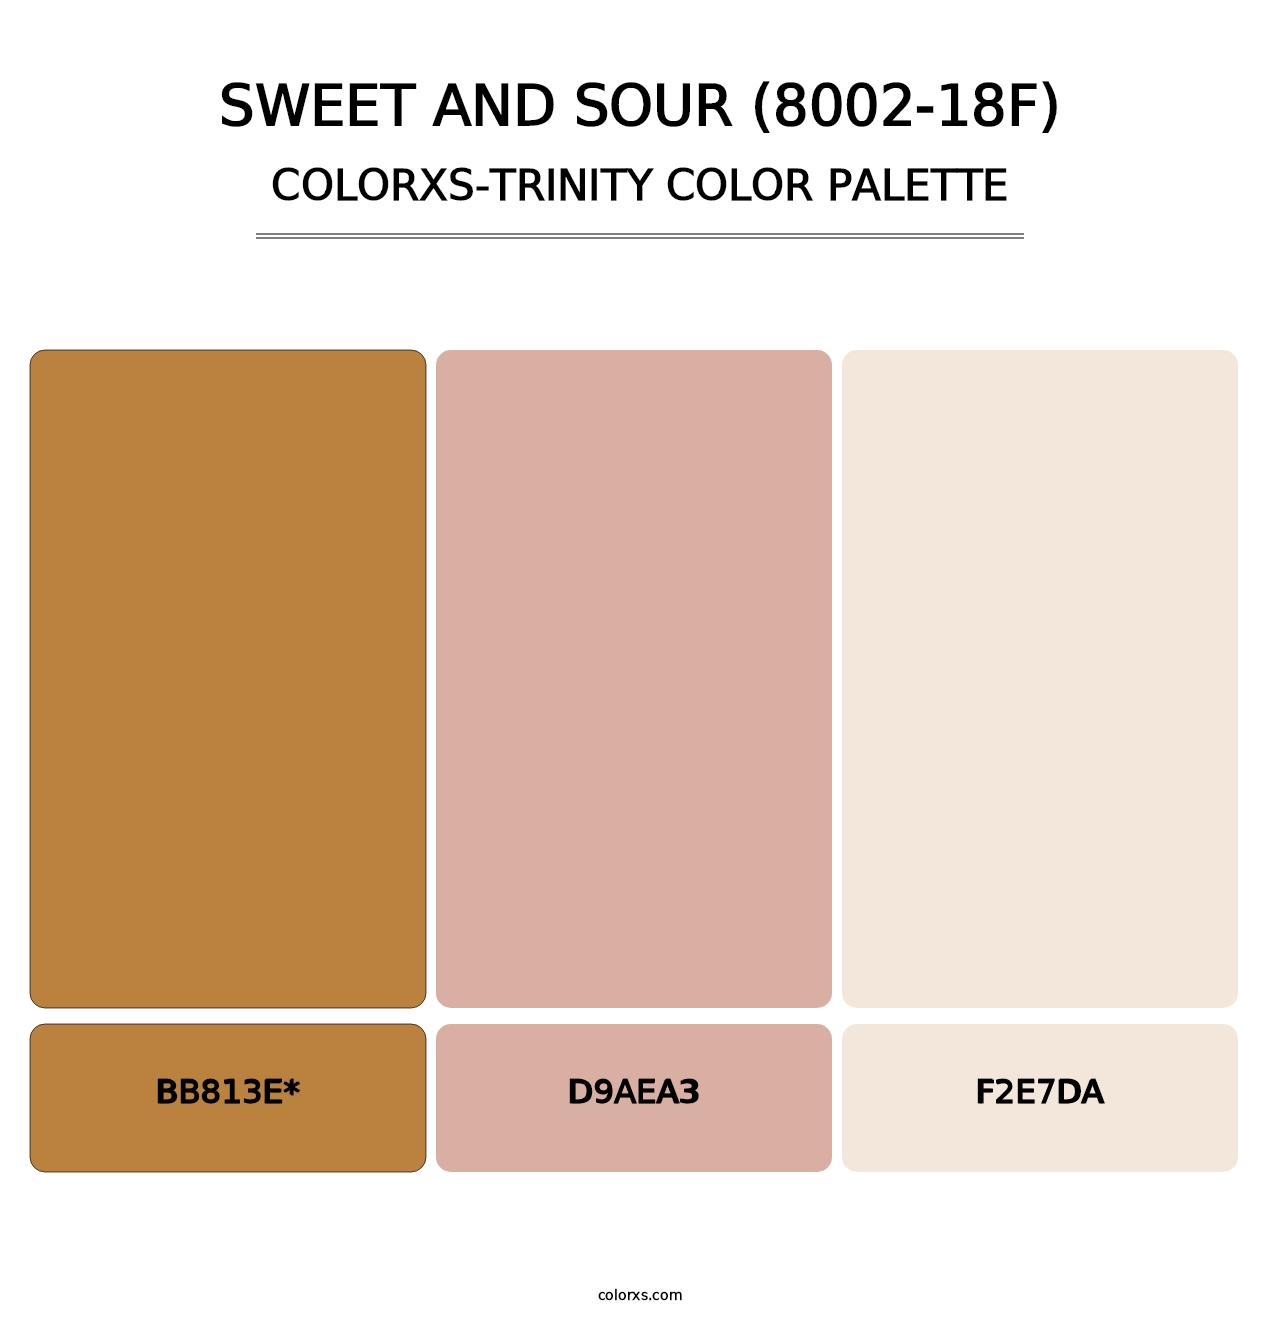 Sweet and Sour (8002-18F) - Colorxs Trinity Palette